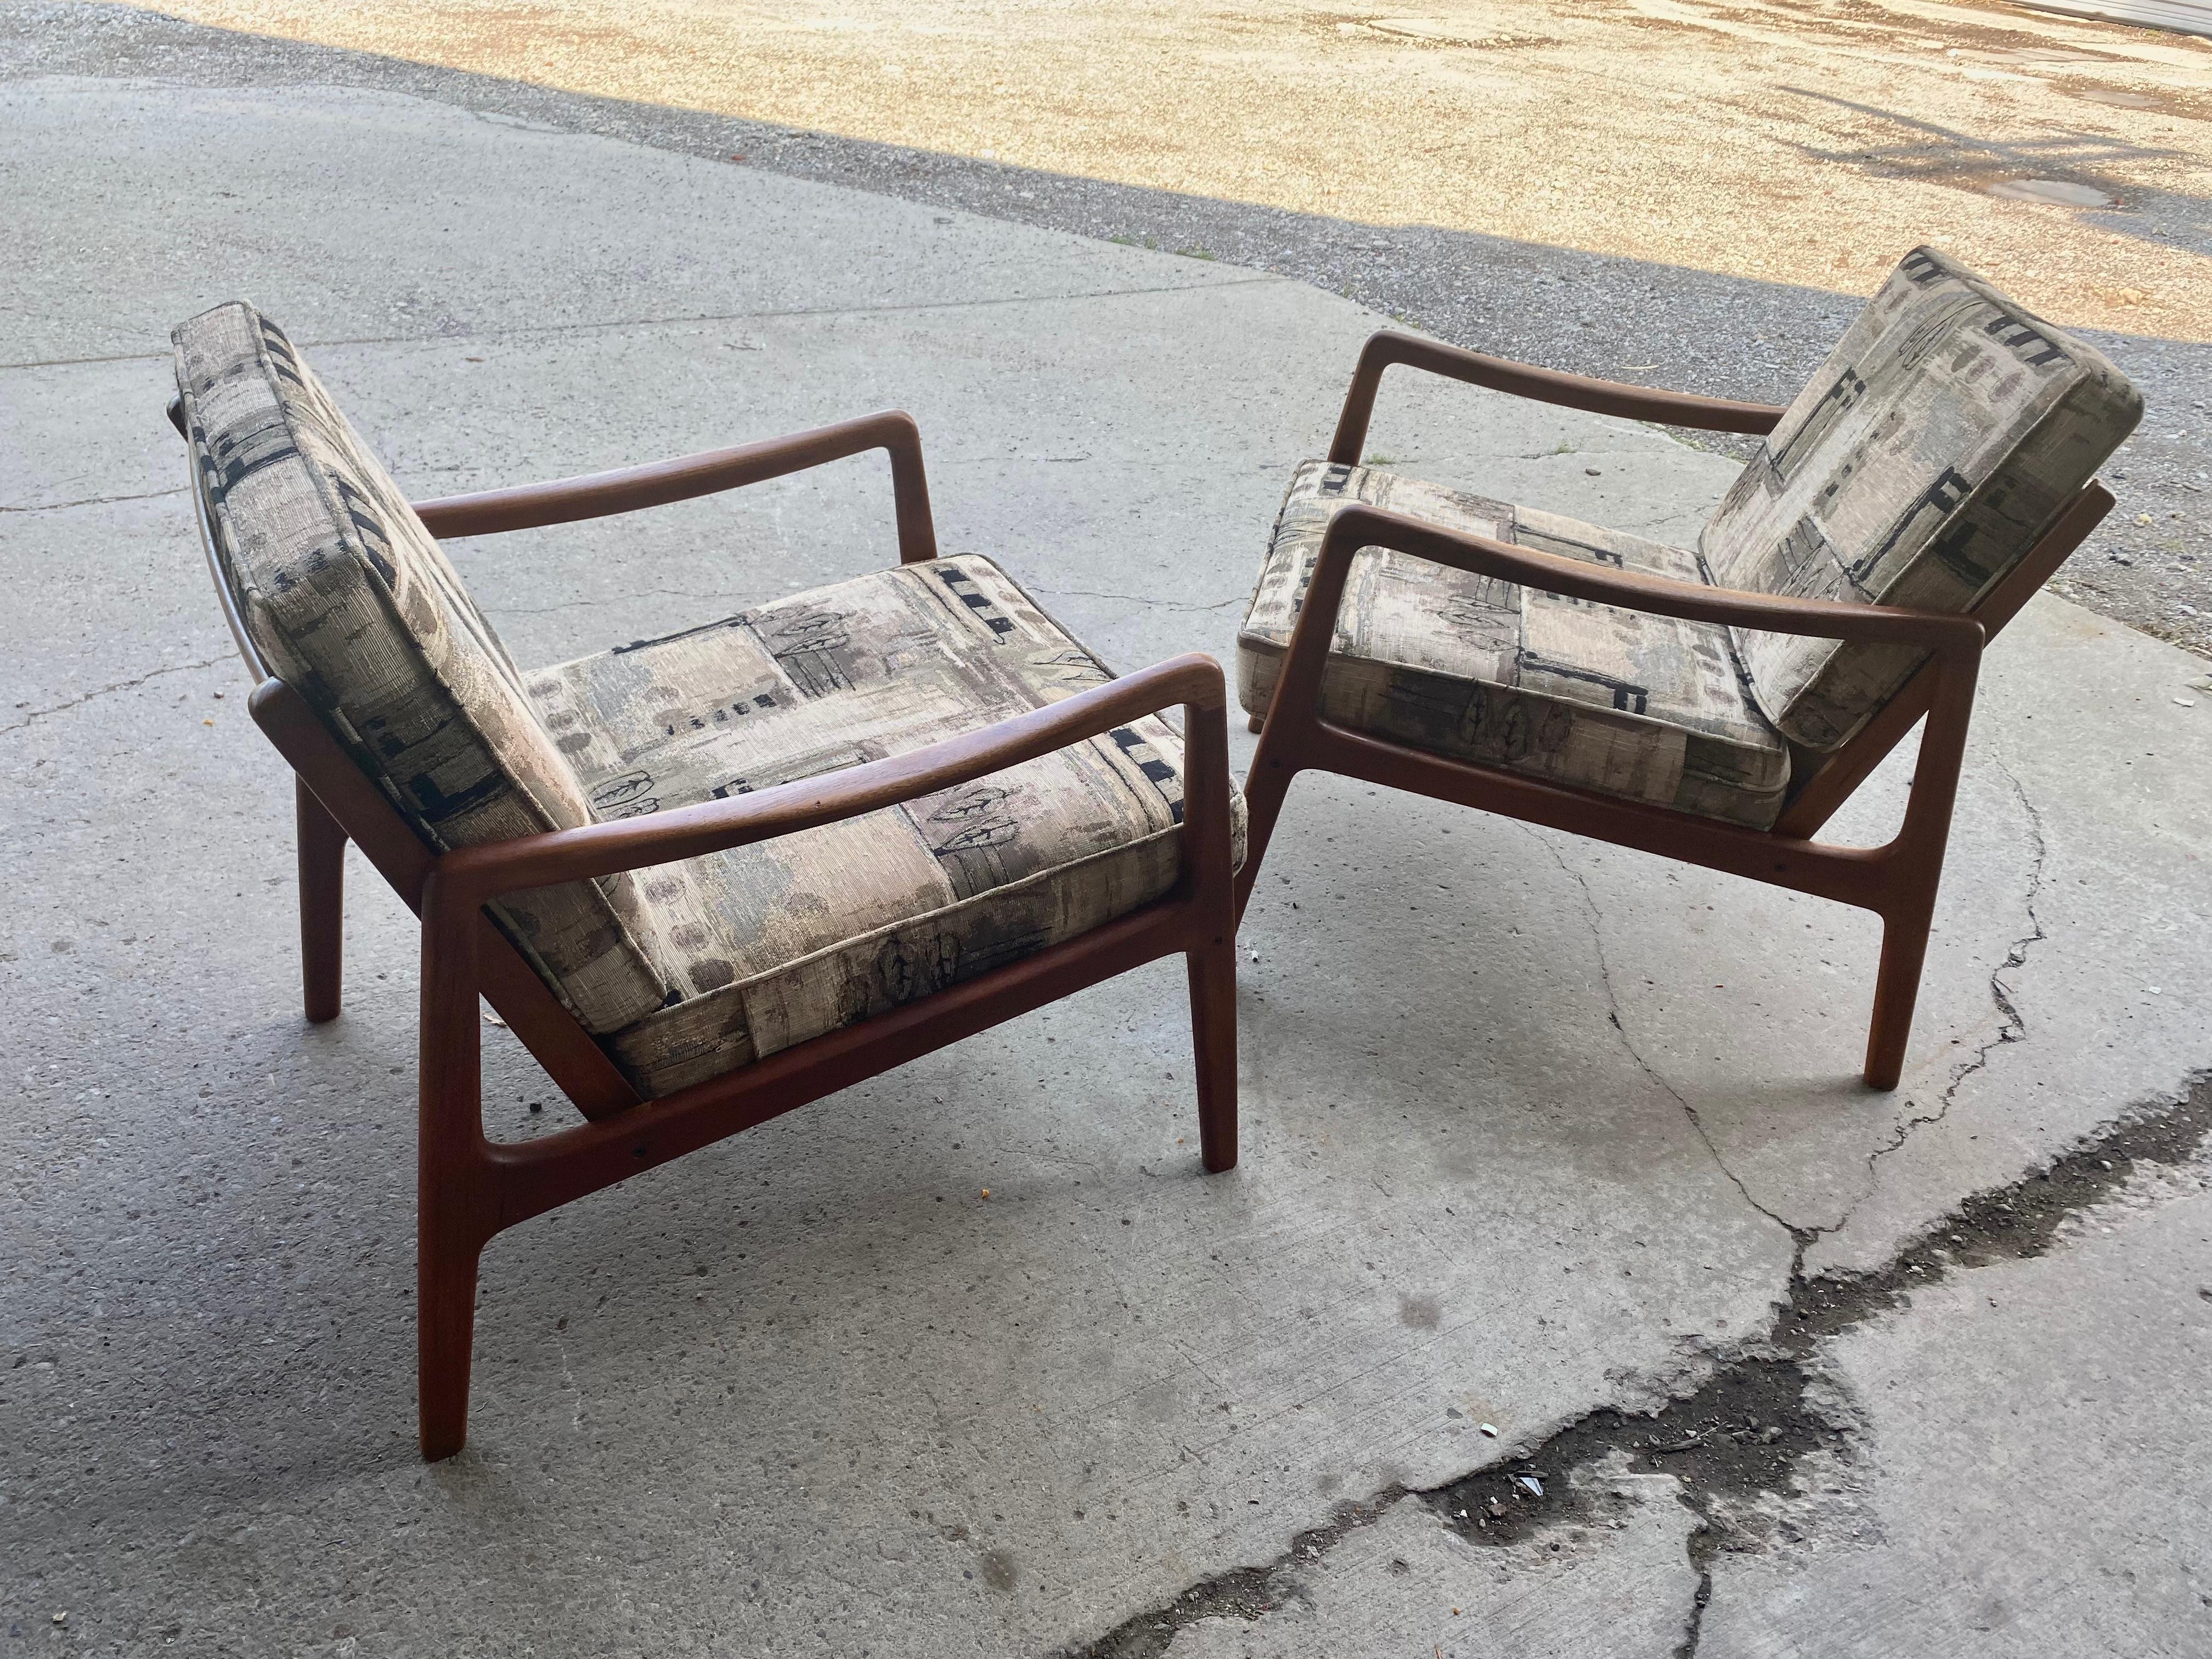 Stunning pair teak lounge chairs designed by Ole Wanscher manufactured by France & Sons,, Retains original finish ,,patina,, Newer seat and back cushions,Also retains early France & Sons metal label..Superior quality and construction,, Extremely